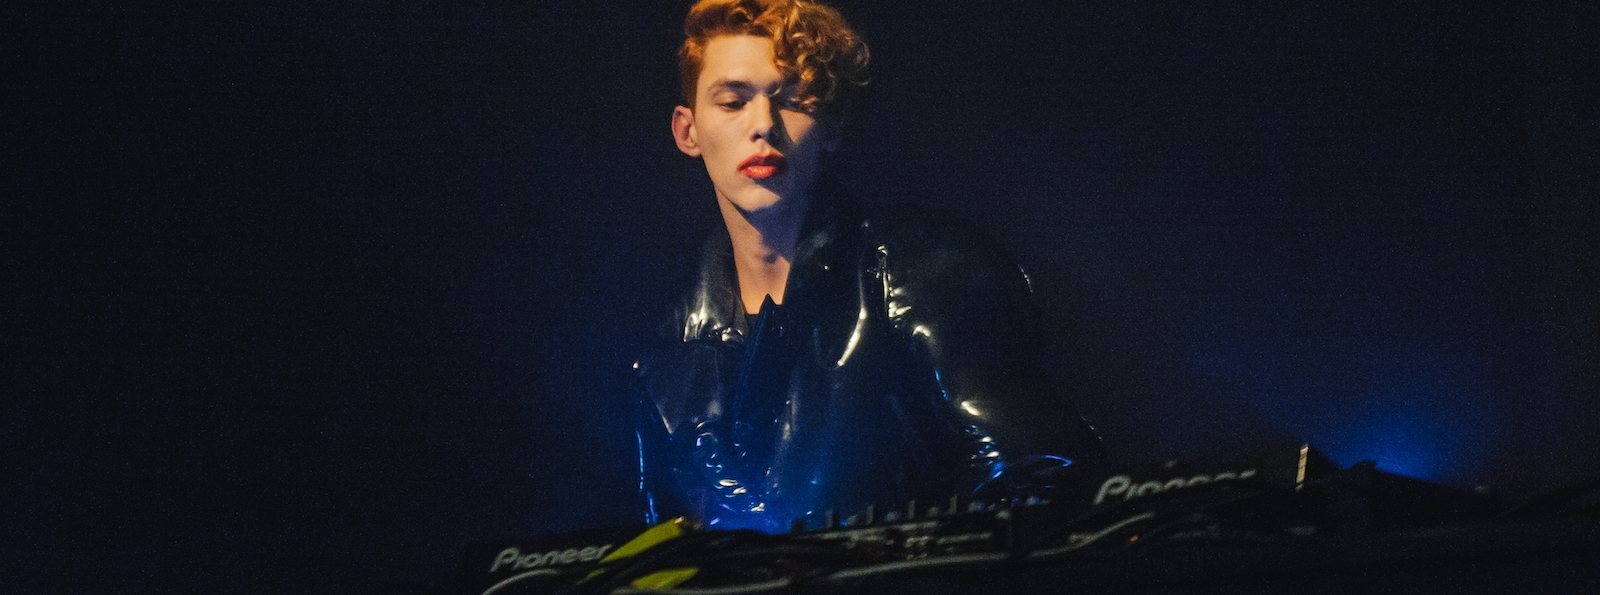 Sophie, Grammy-Nominated Artist And Producer, Dies